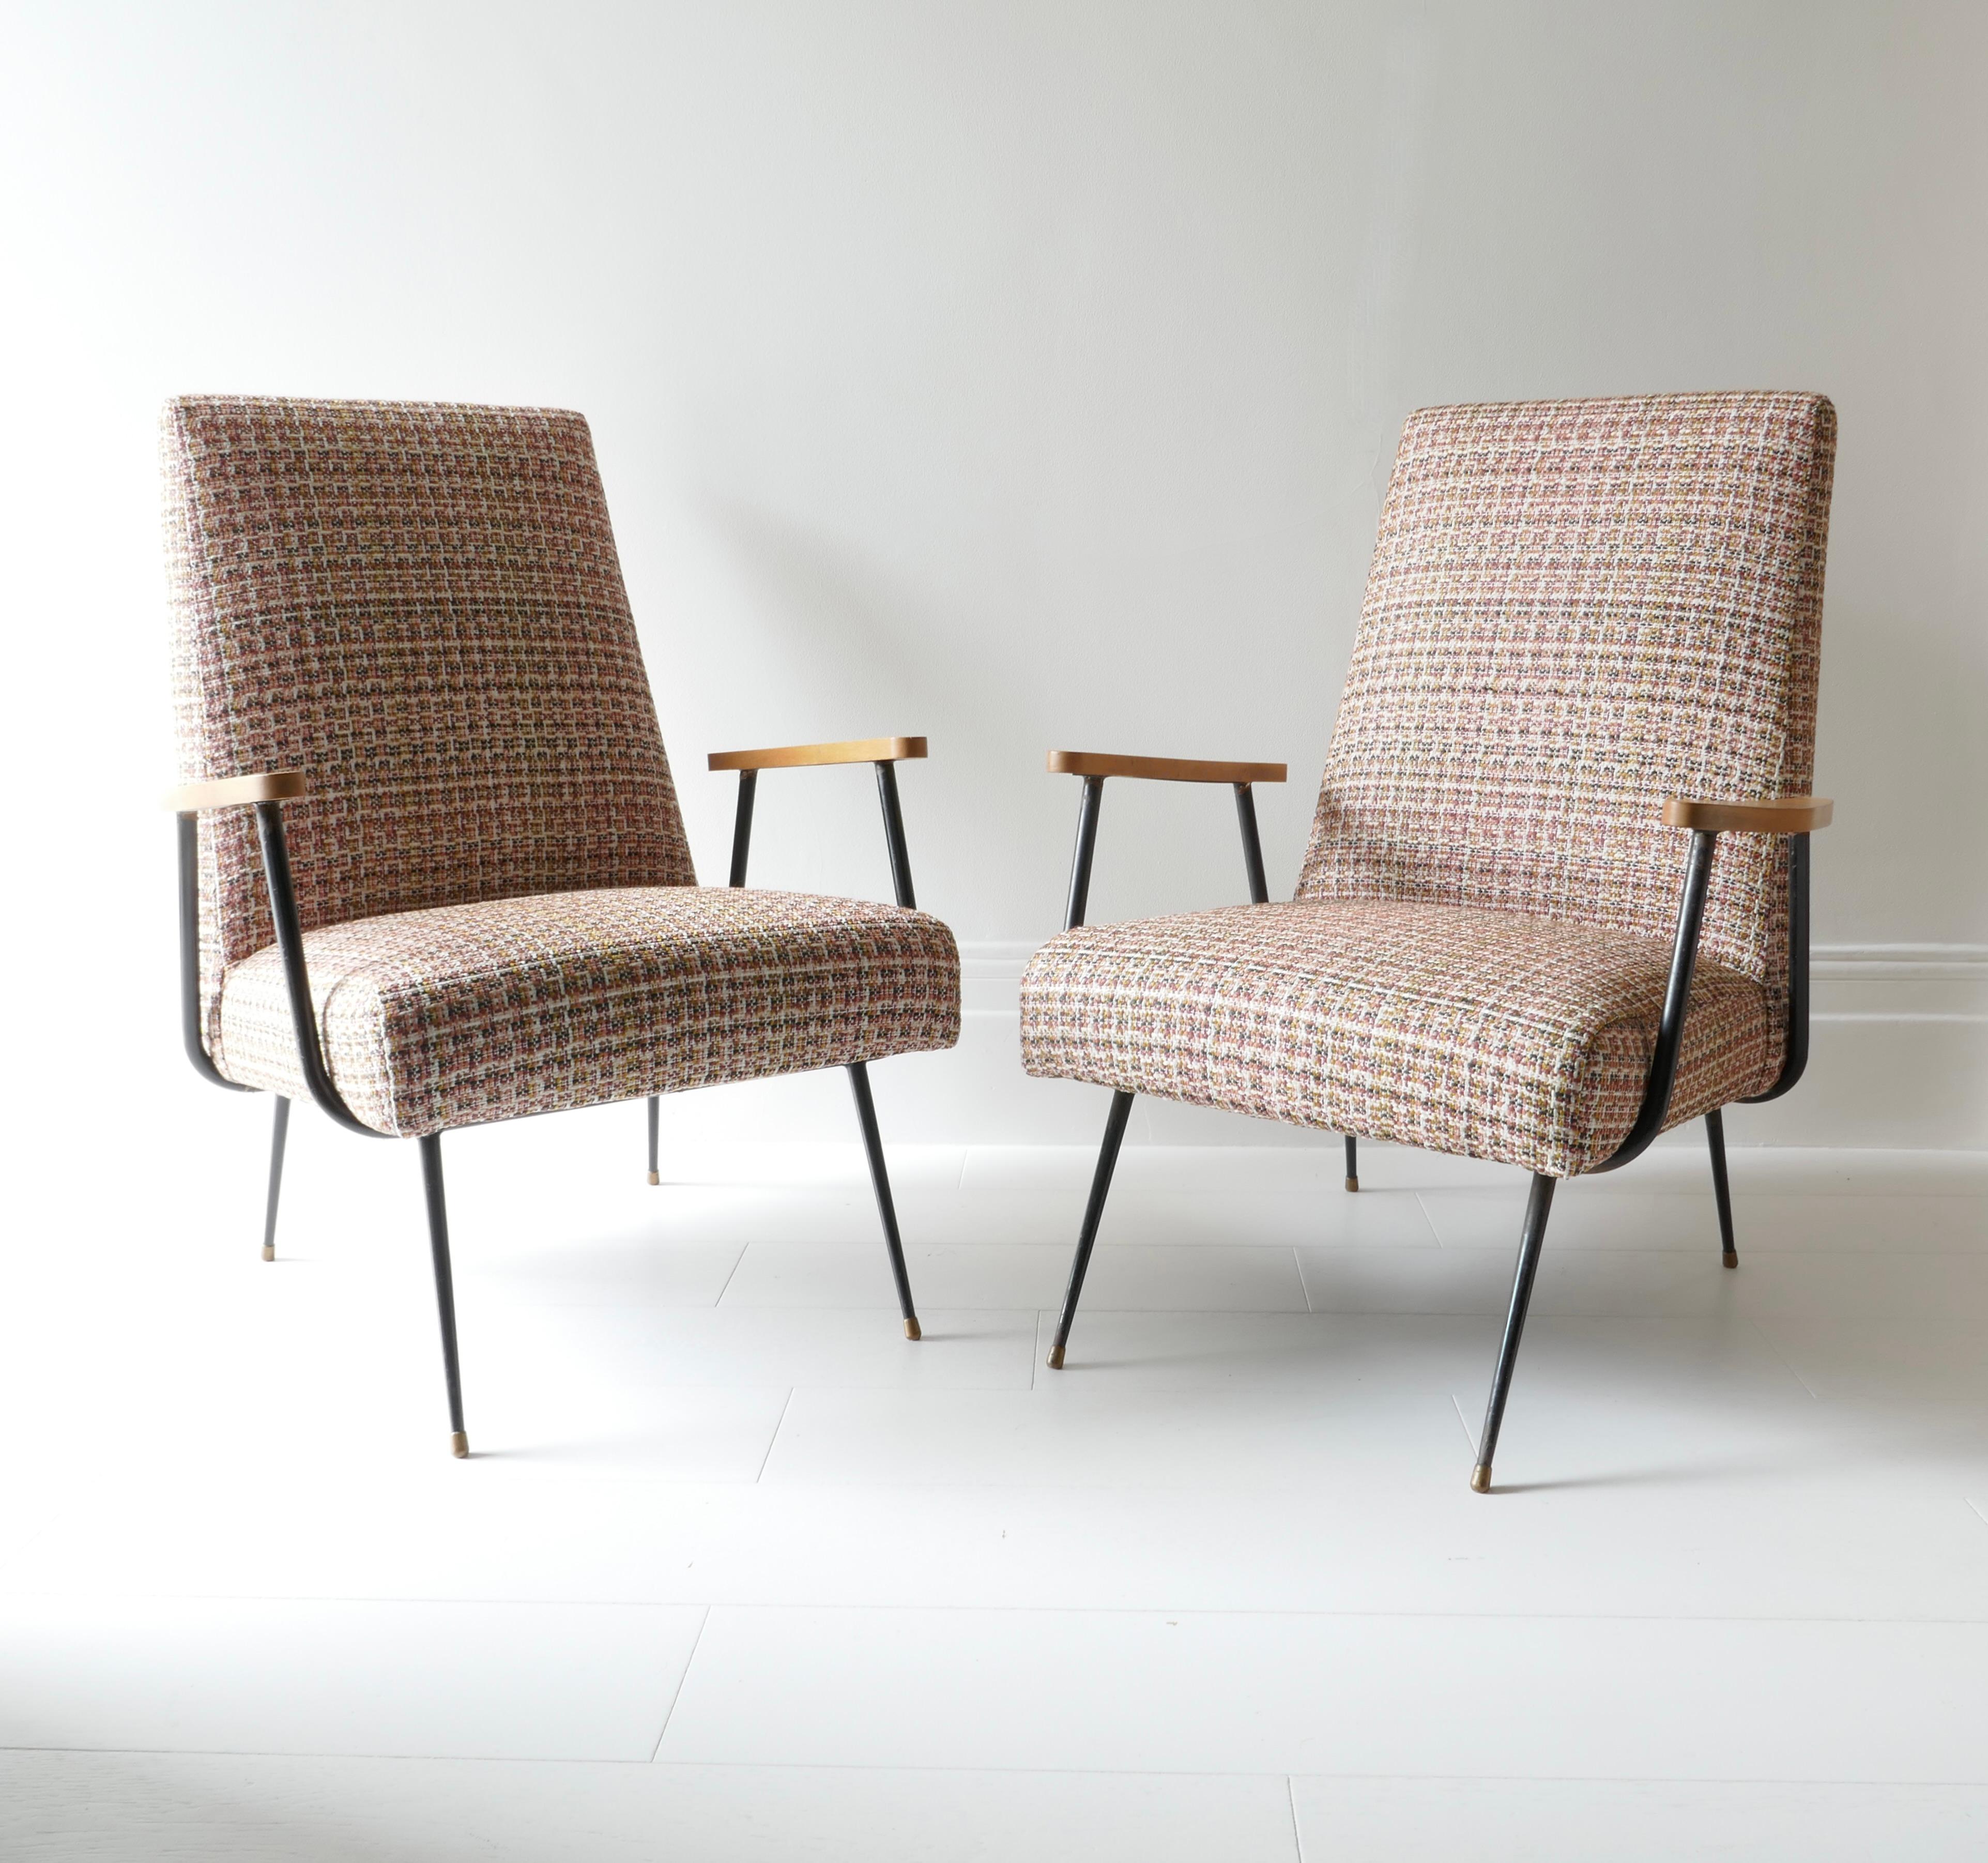 Pair of French armchairs reupholstered in a beautiful weaved pattern fabric in Terra di Siena colour with blended colours and complex pattern. 
This fabric is part of Casamance's outdoor/indoor collection which focuses on natural look fabrics.
The